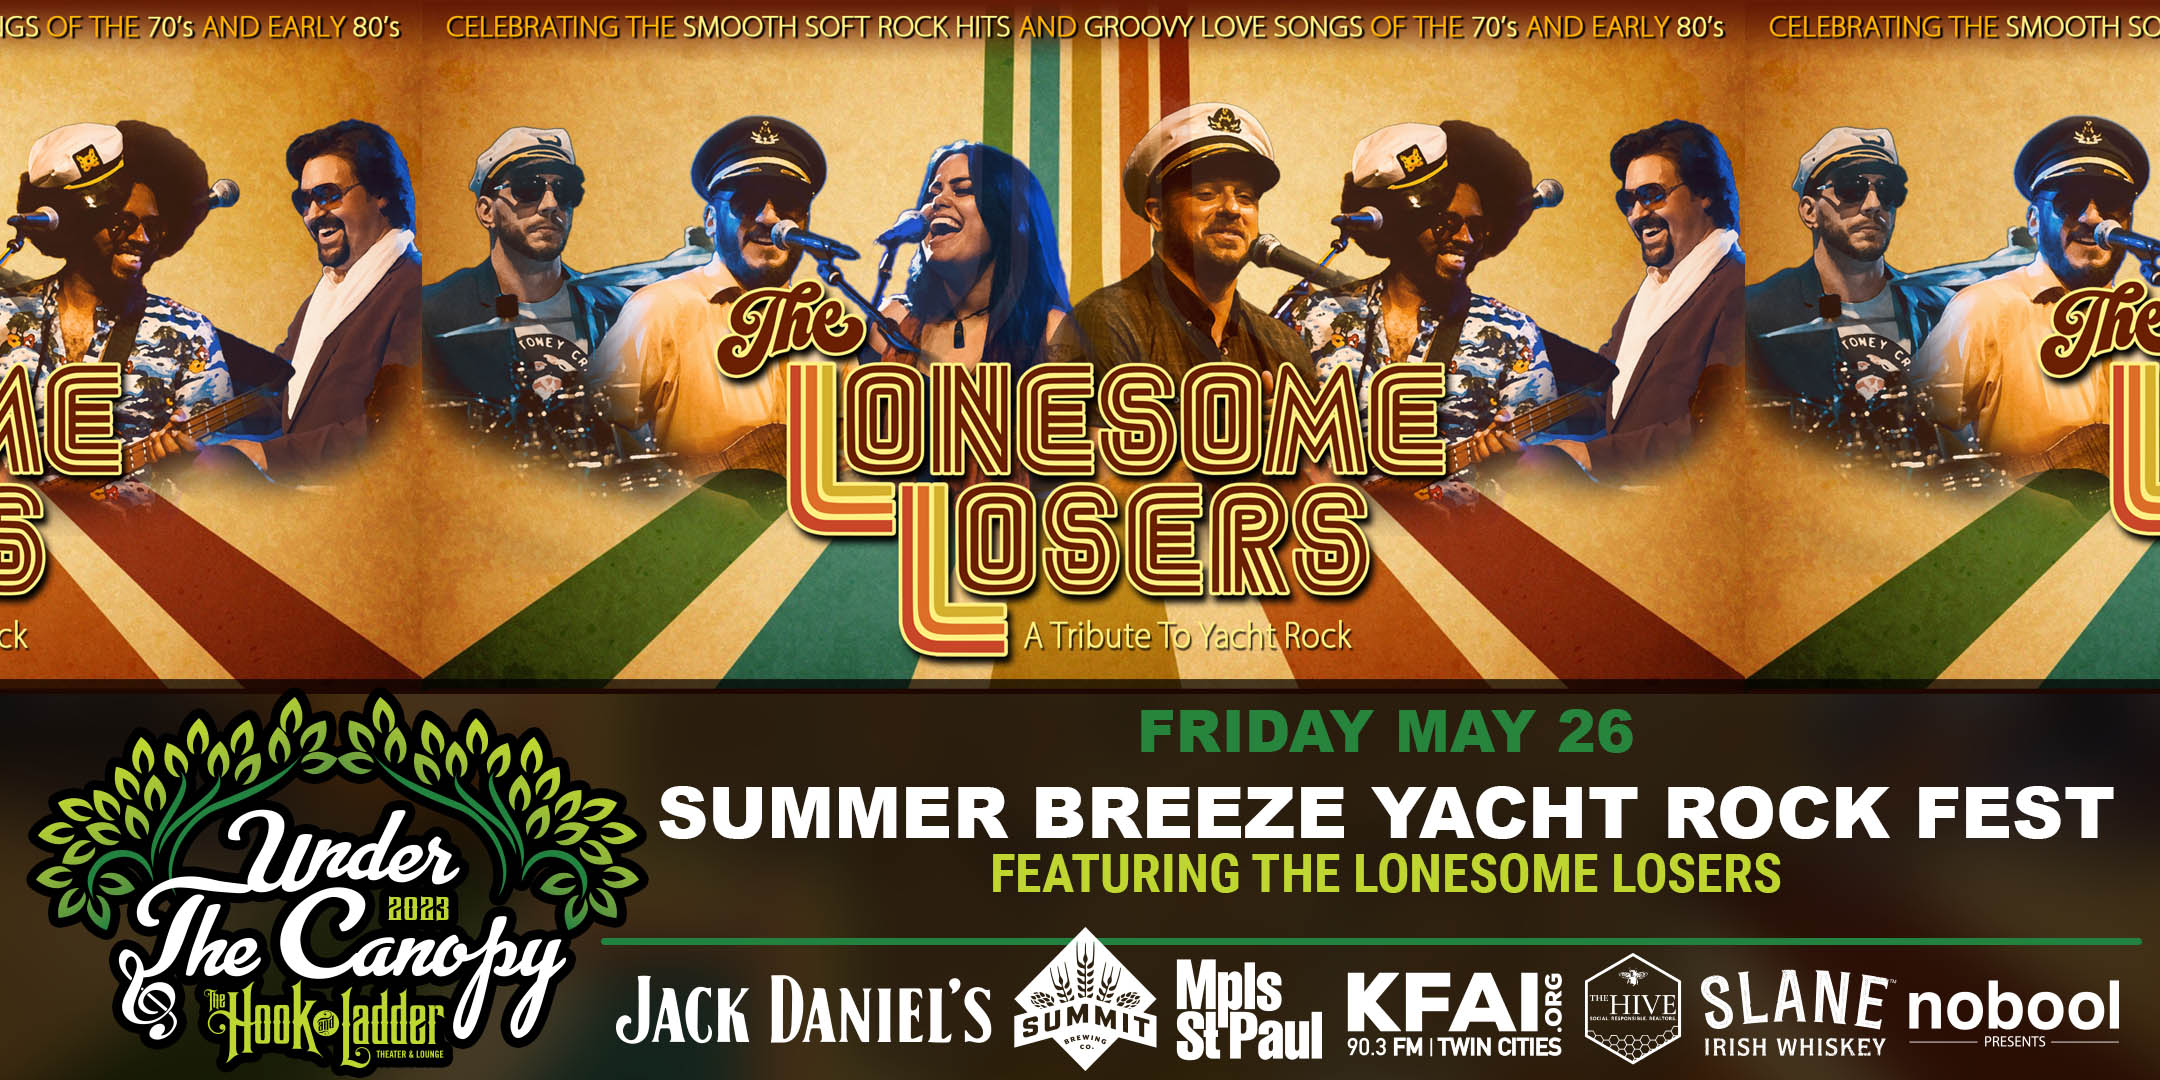 Summer Breeze Yacht Rock Fest featuring The Lonesome Losers Saturday, May 26 Under The Canopy at The Hook and Ladder Theater